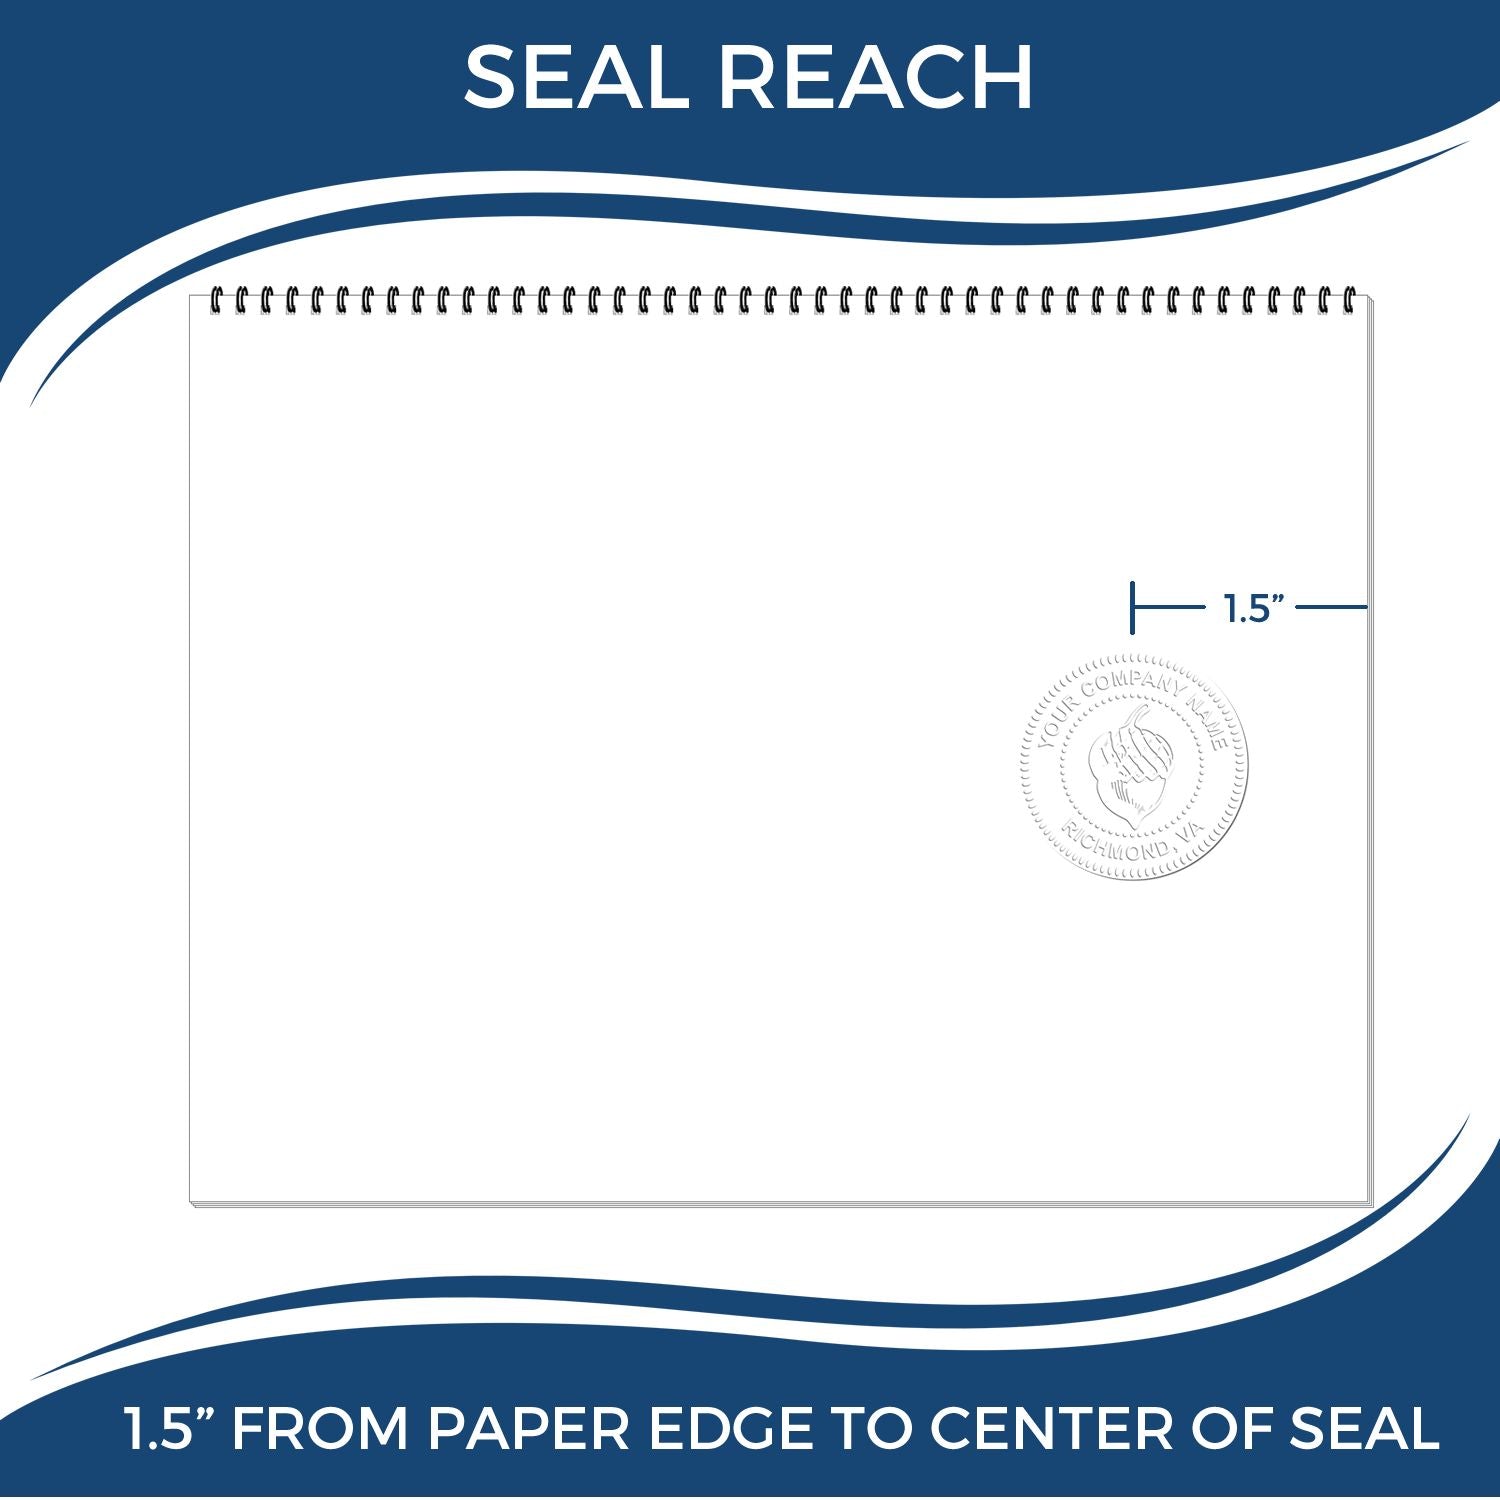 An infographic showing the seal reach which is represented by a ruler and a miniature seal image of the Hybrid Alabama Land Surveyor Seal